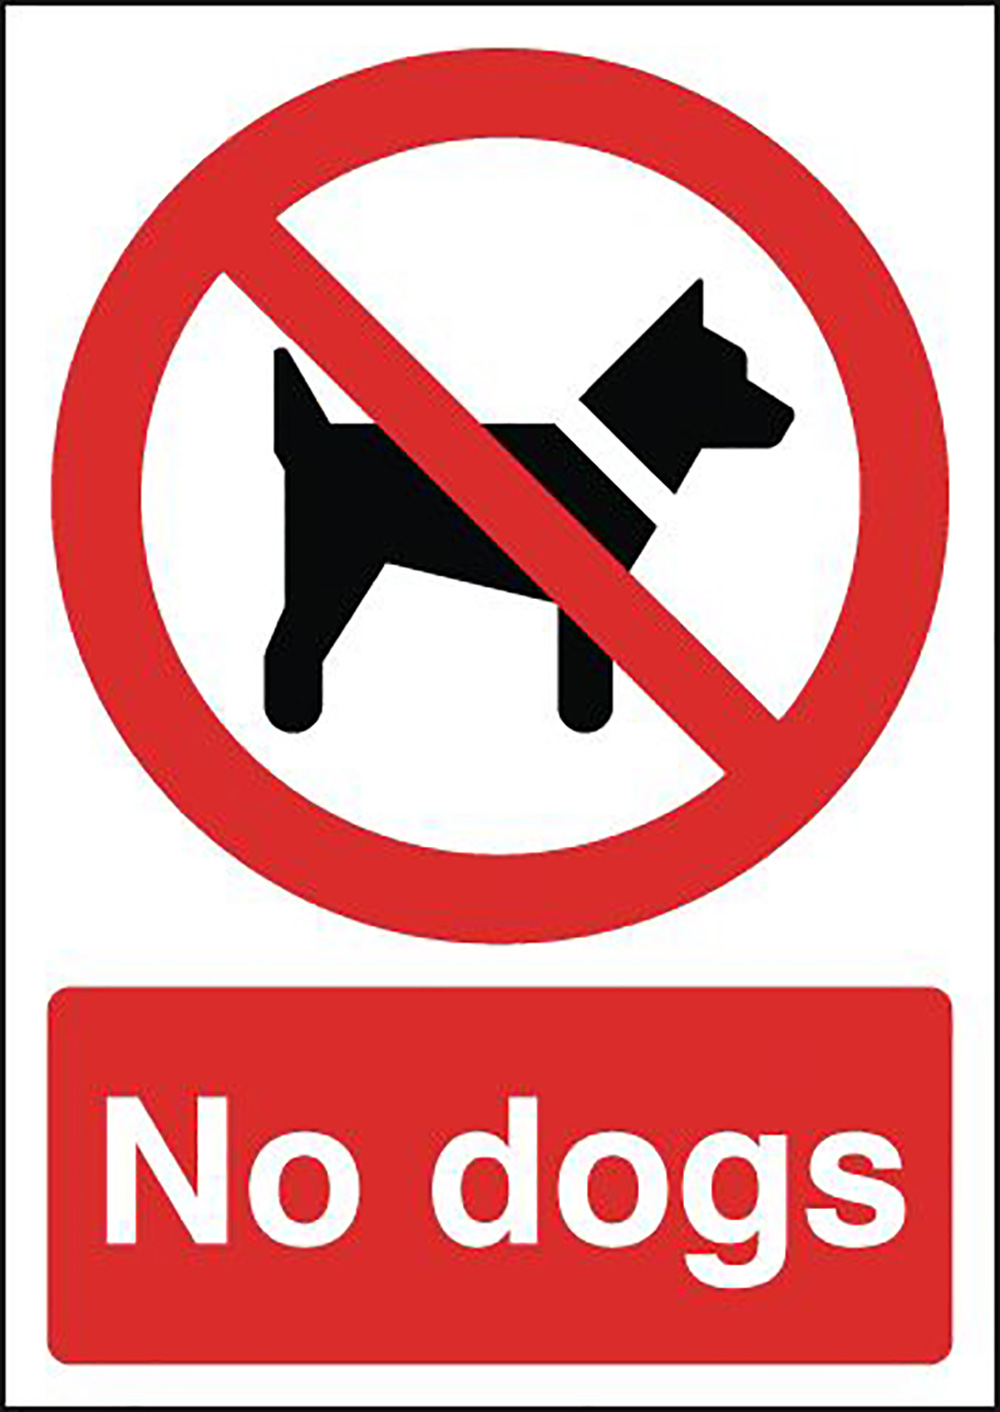 No Dogs 297x210mm Self Adhesive Vinyl Safety Sign  